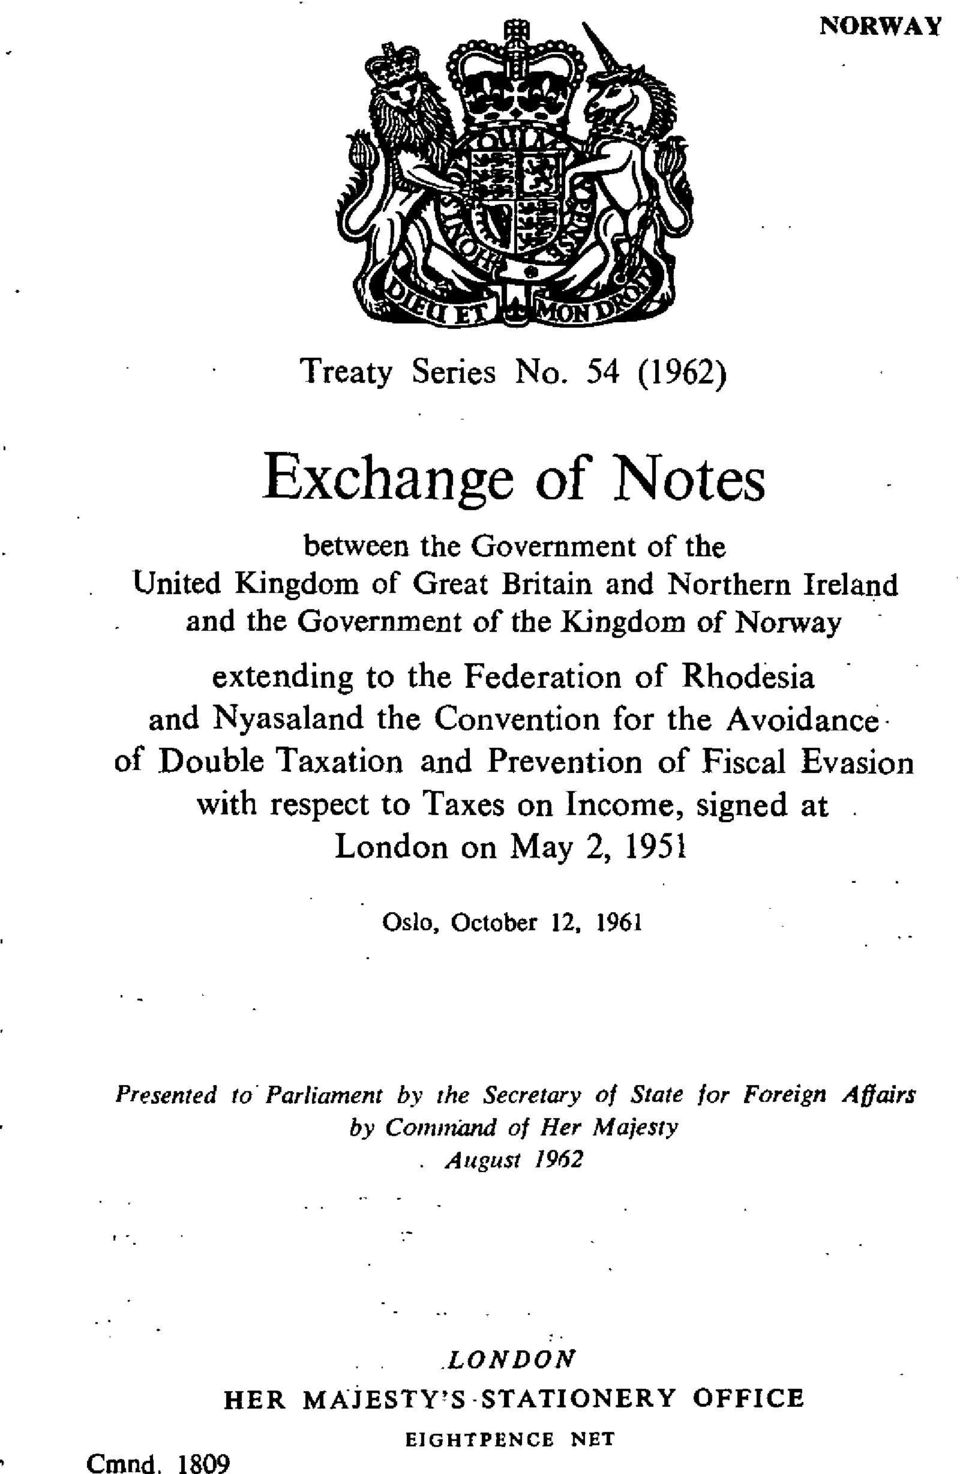 of Norway extending to the Federation of Rhodesia and Nyasaland the Convention for the Avoidance of Double Taxation and Prevention of Fiscal